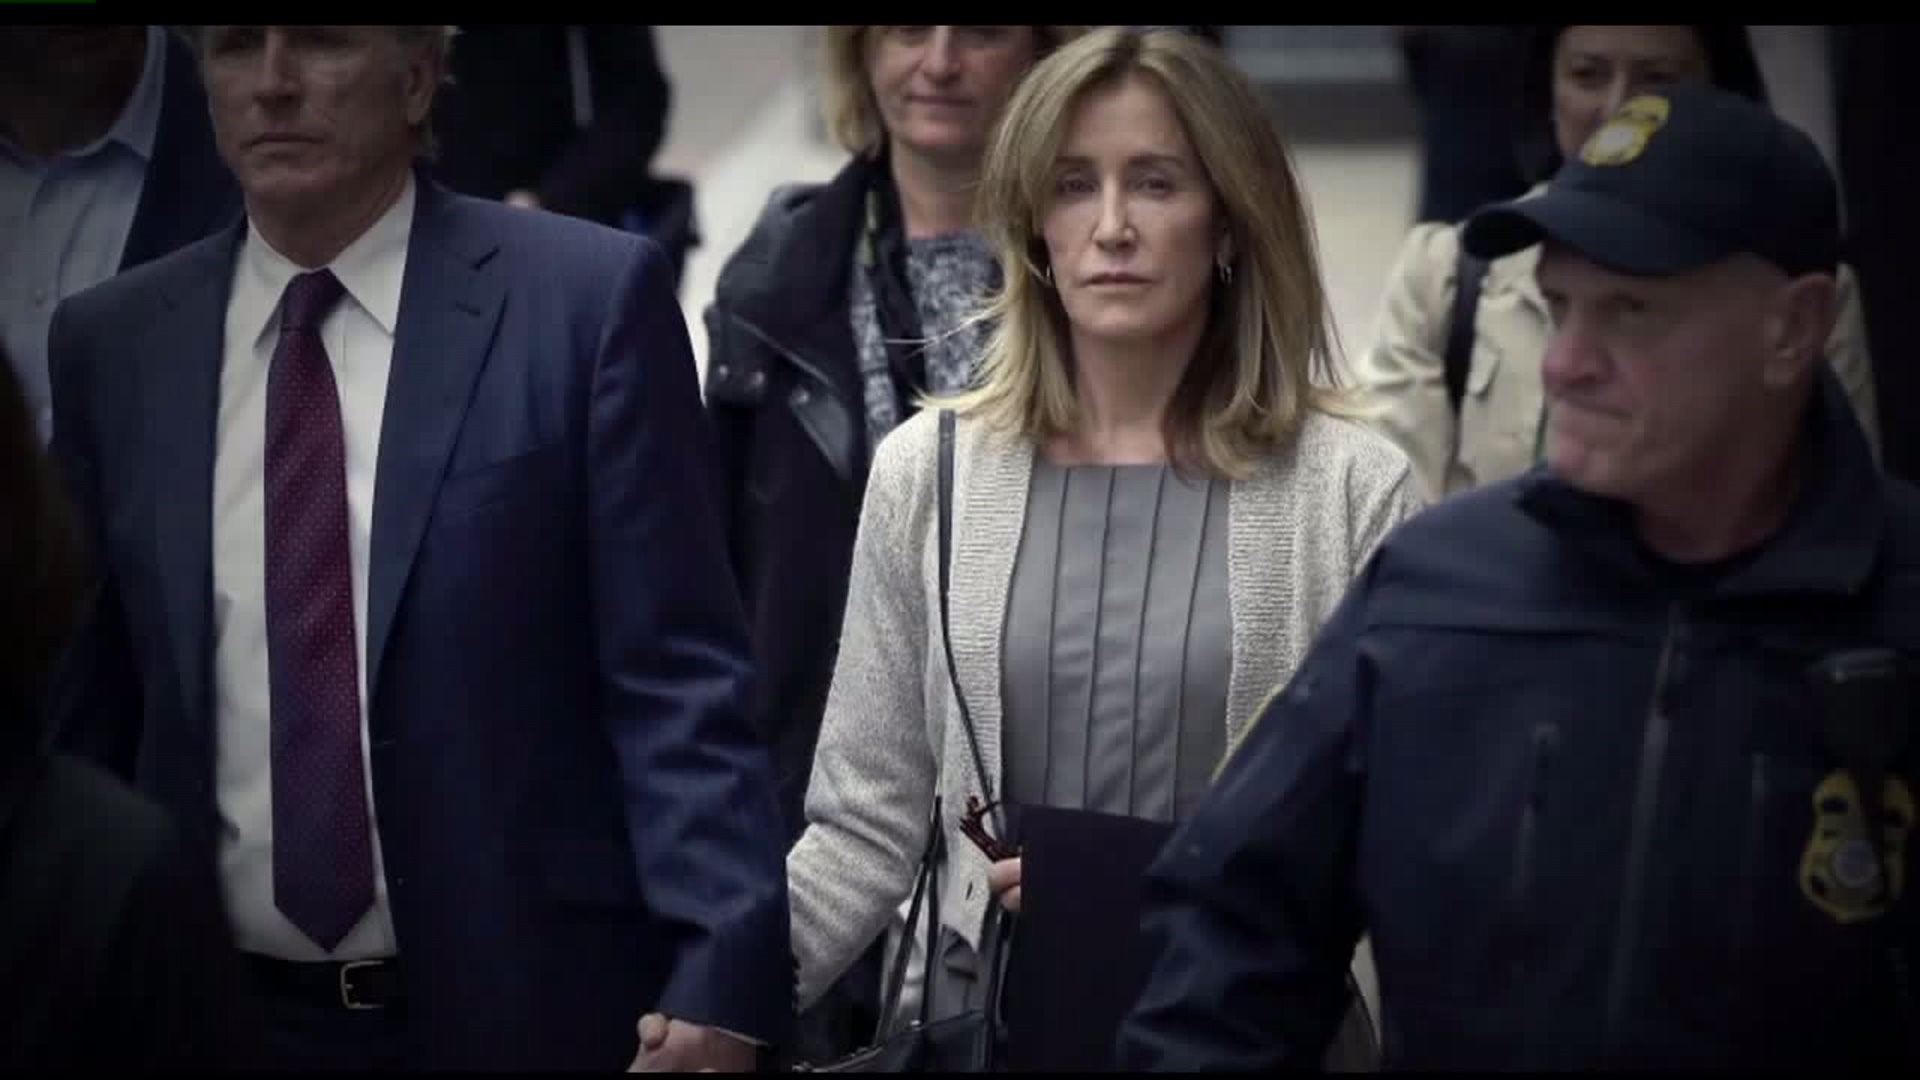 Felicity Huffman gets 14 days in prison in connection with college admission scandal